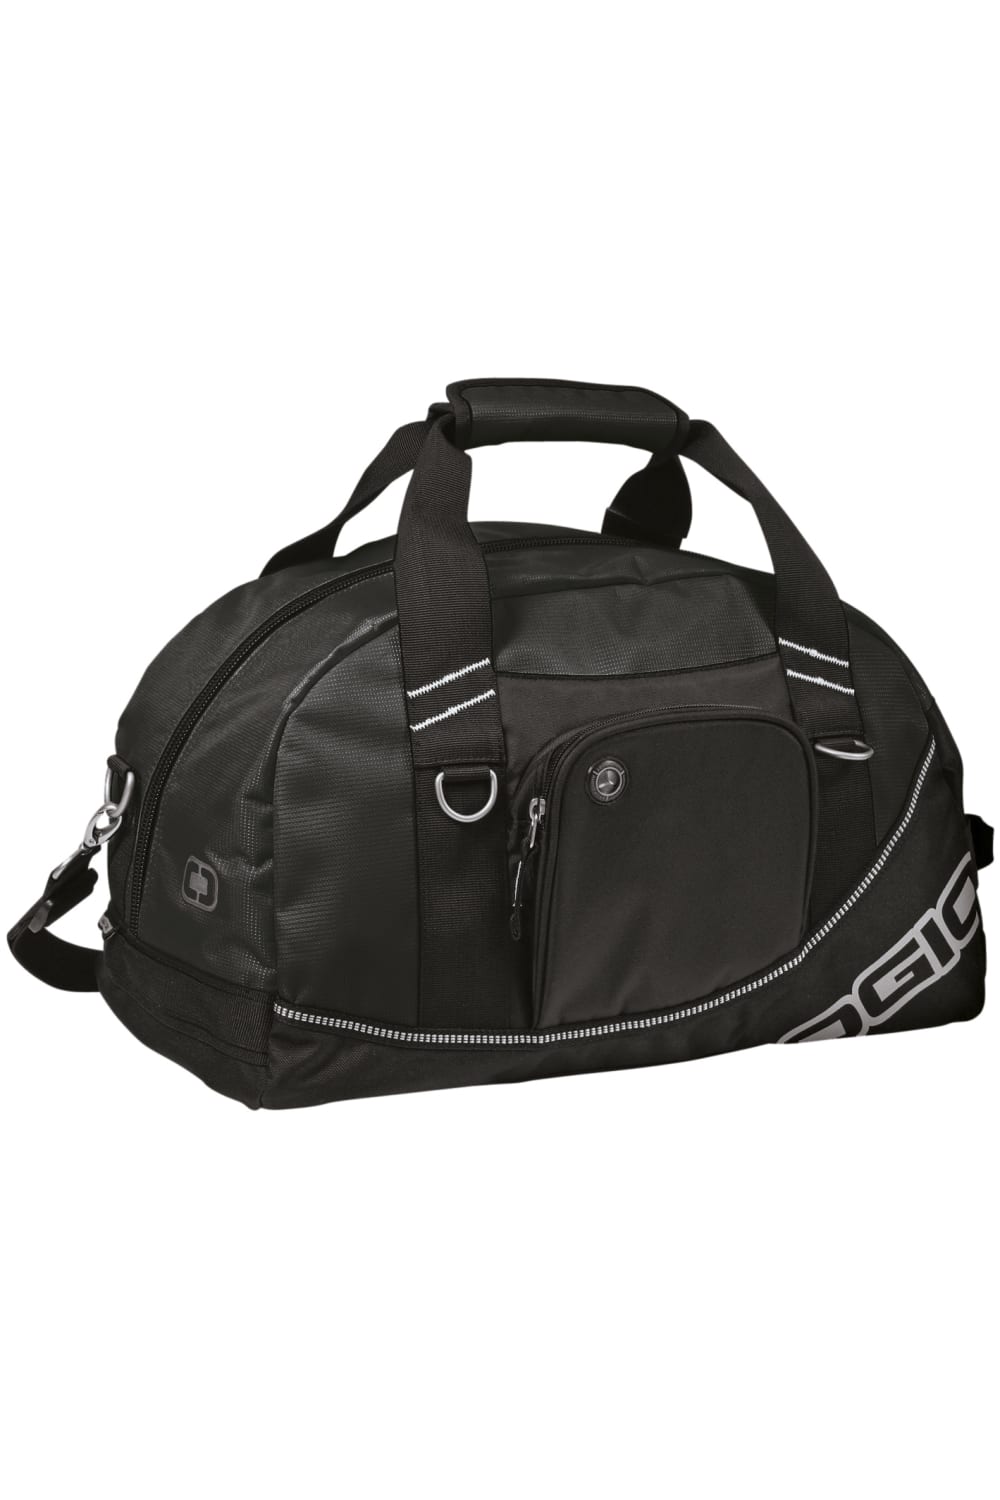 Ogio Half Dome Sports/Gym Duffel Bag (29.5 Liters) (Pack of 2) (Black/Black) (One Size)